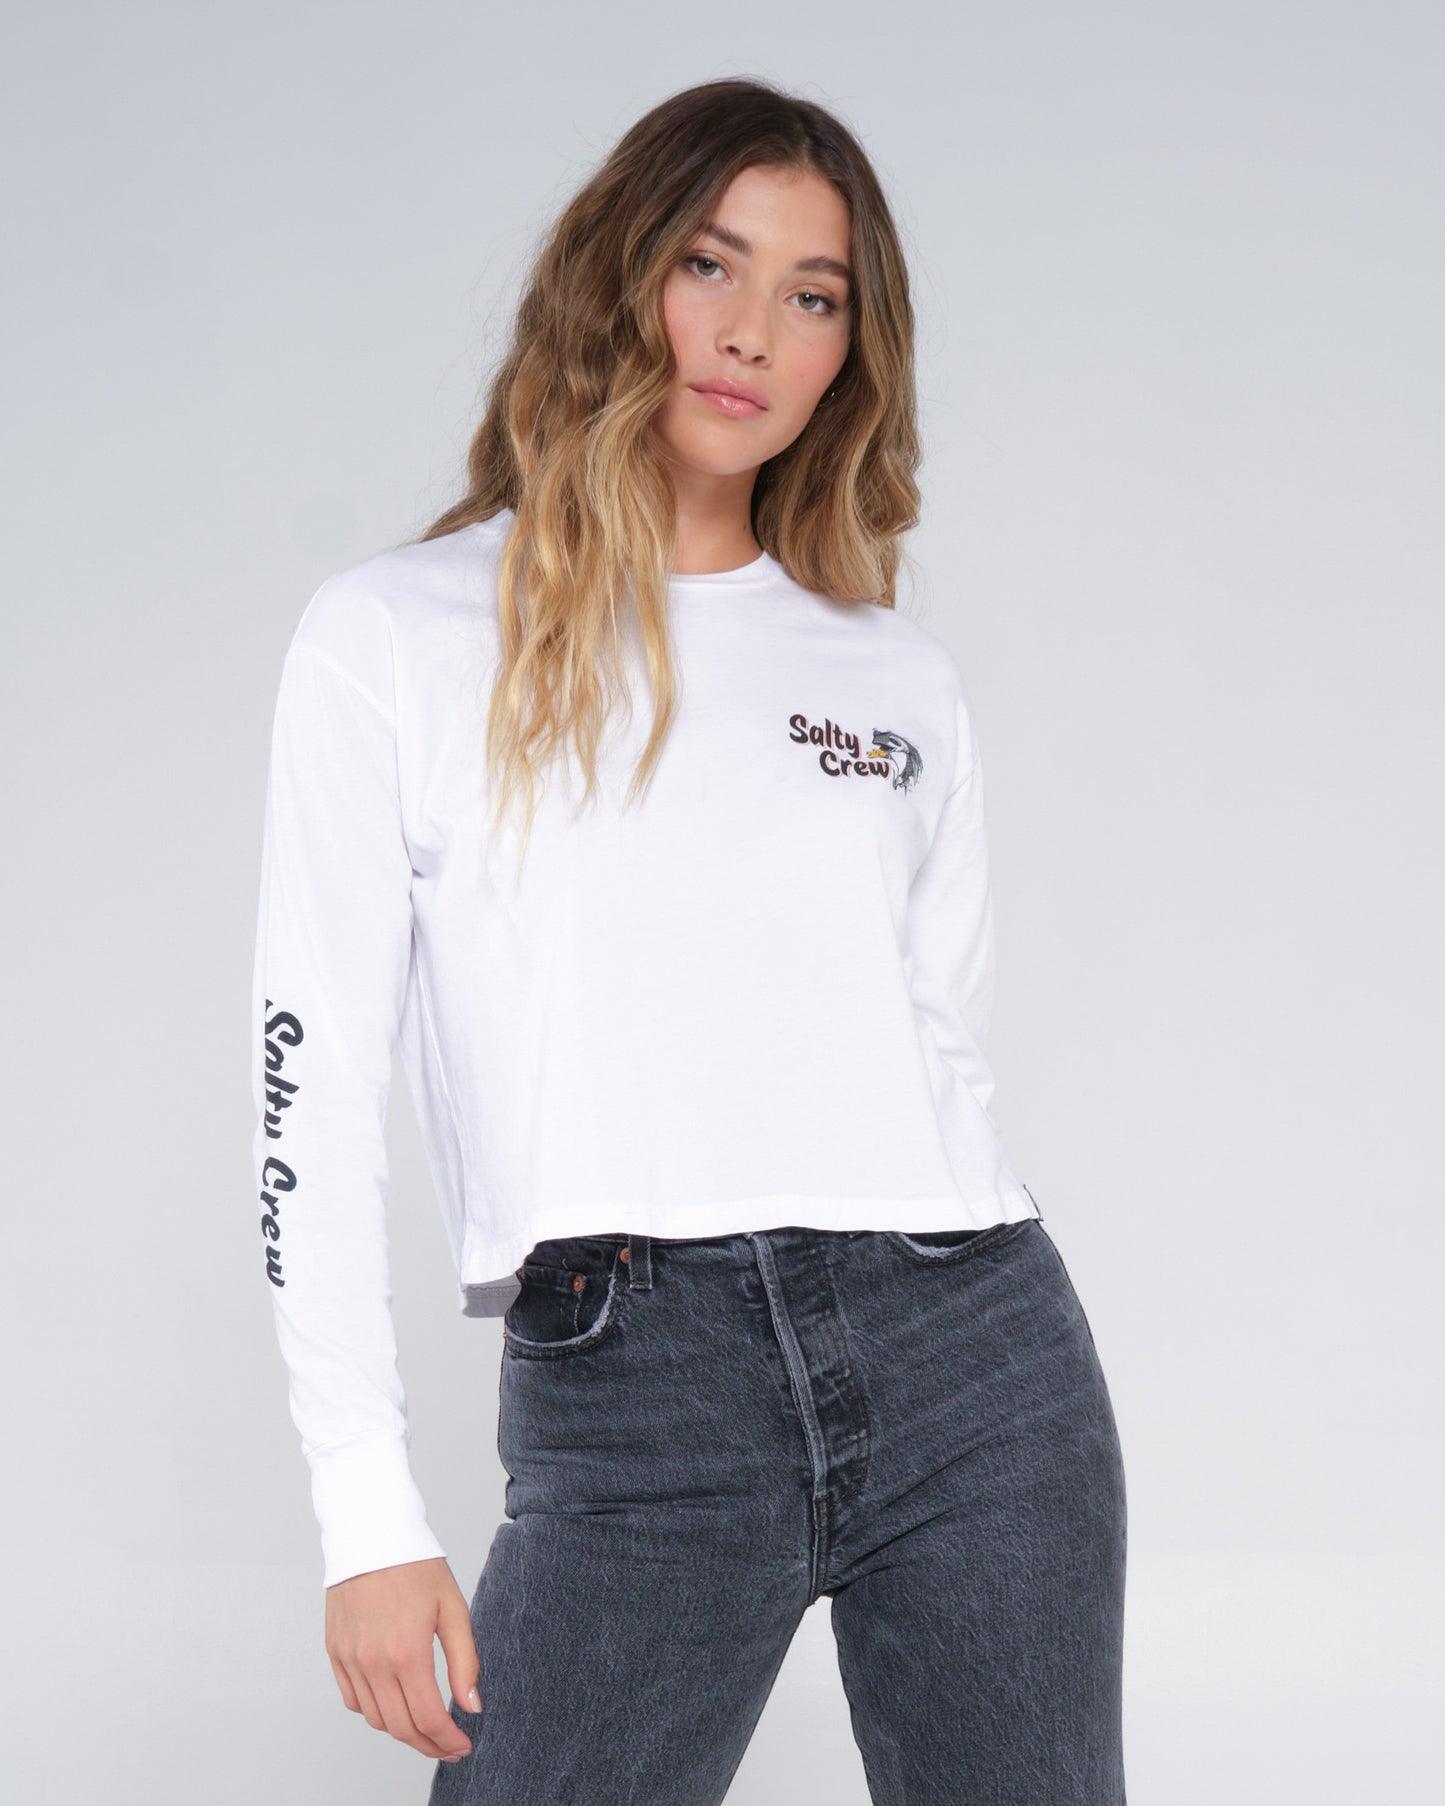 Fish N Chips L/S Crop Tee - White - Purpose-Built / Home of the Trades